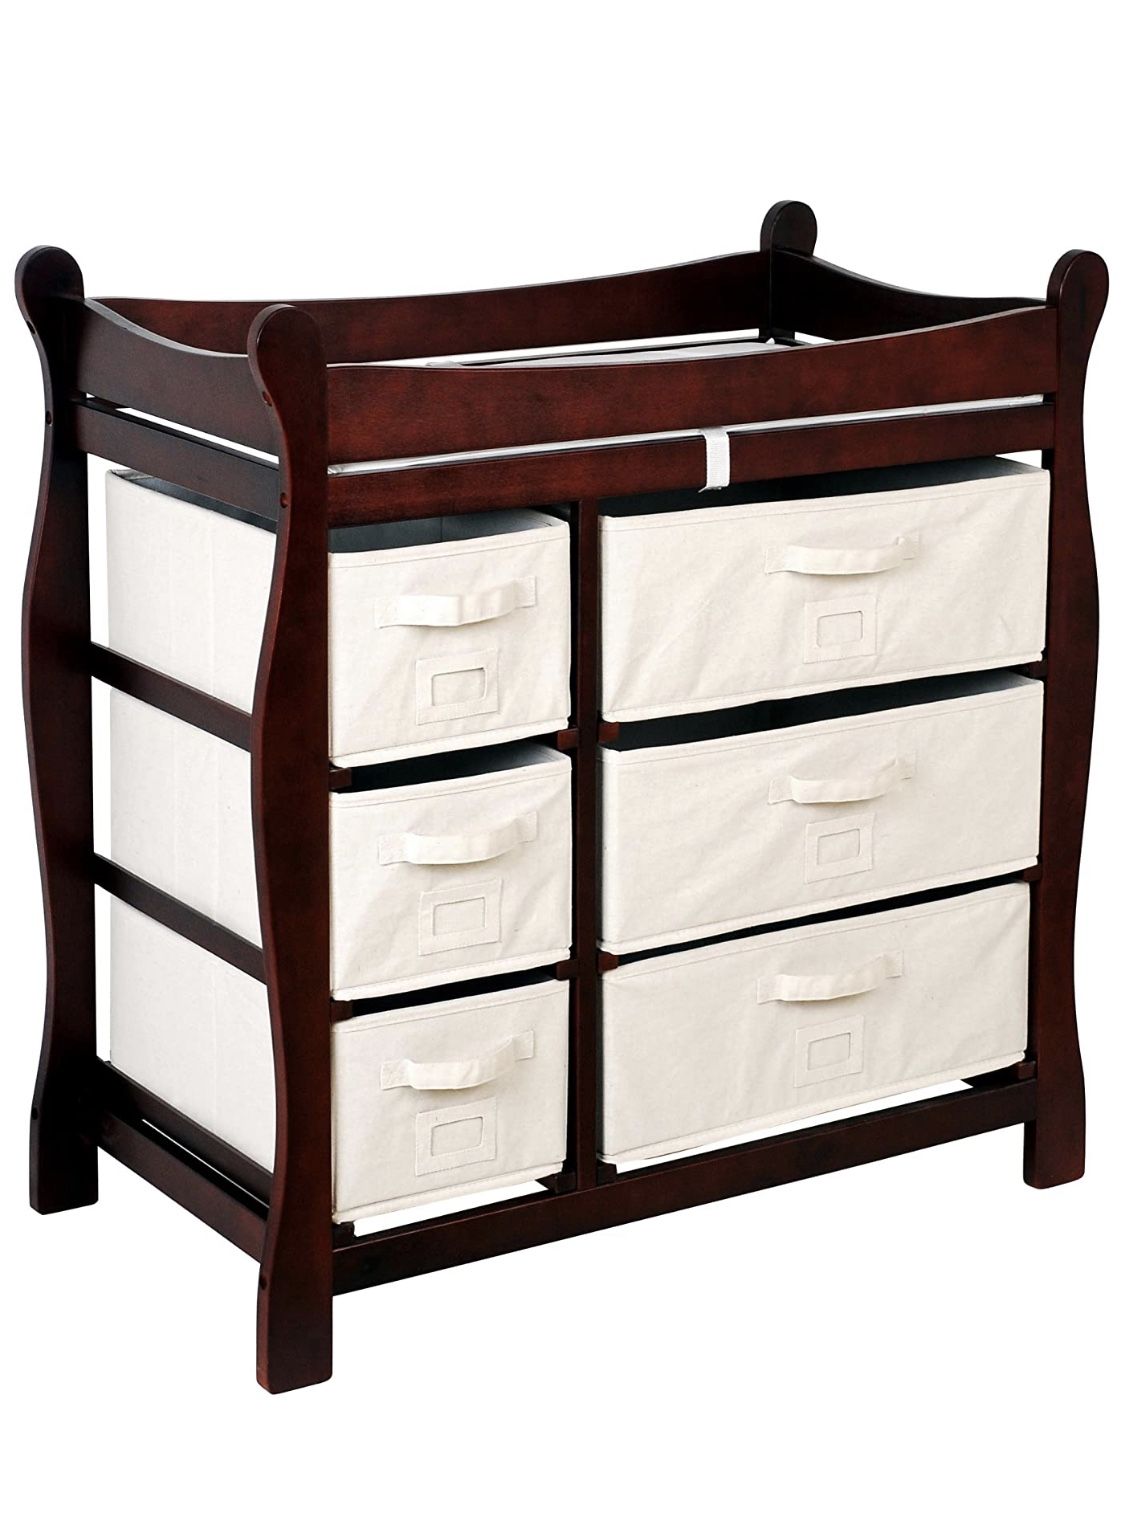 Baby changing table with 6 storage baskets